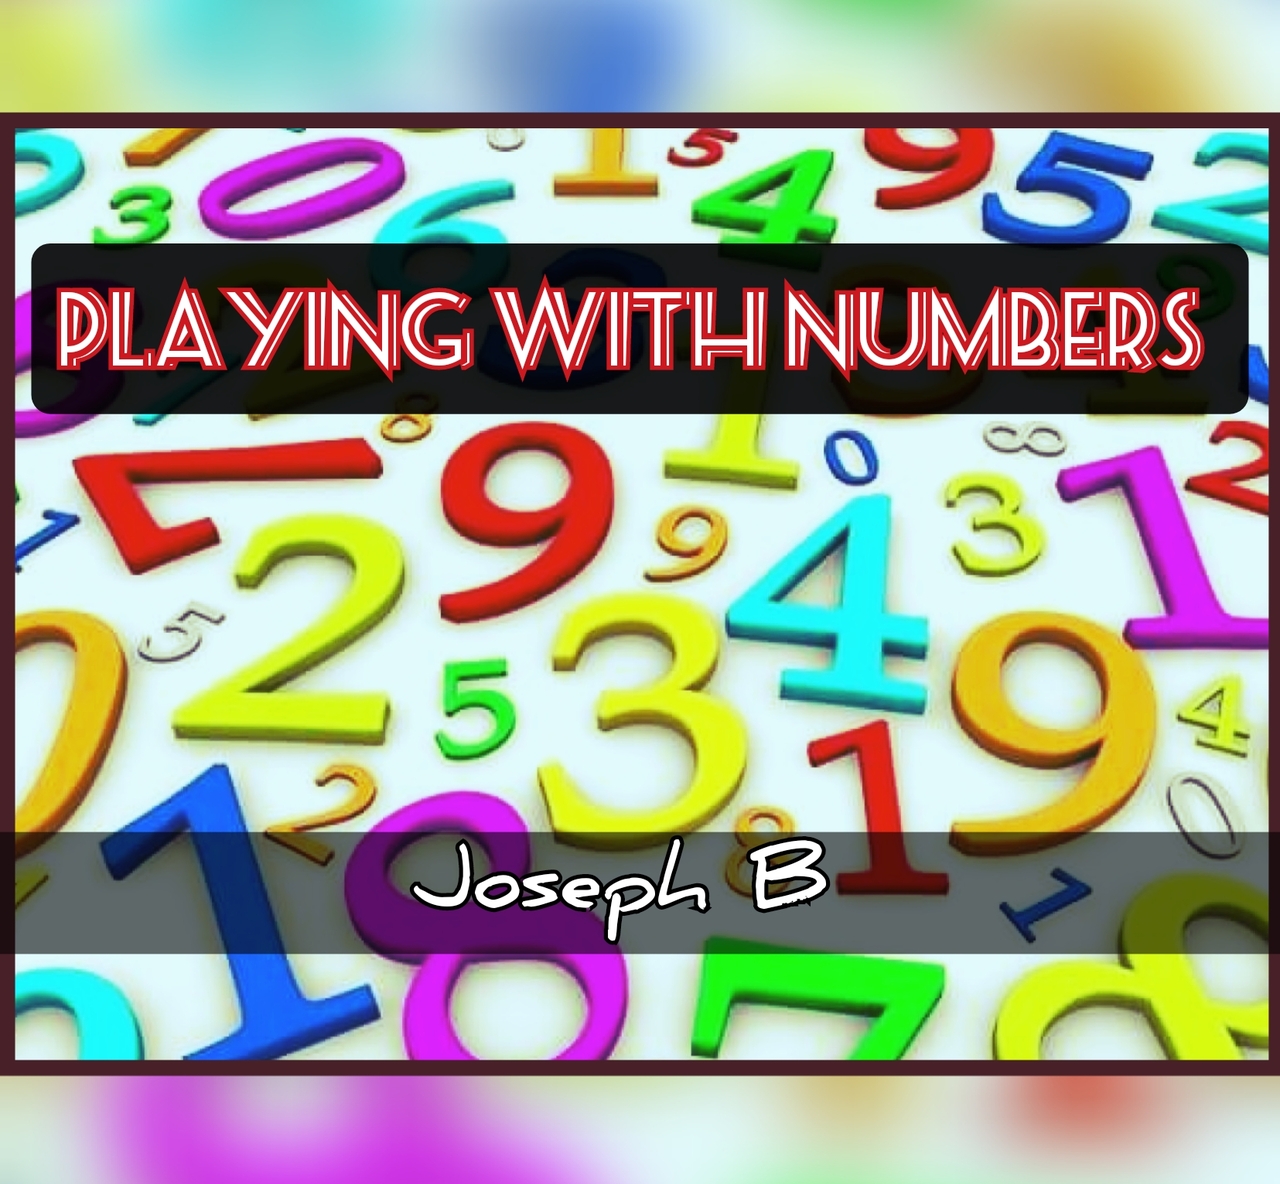 Playing With Numbers by Joseph B (Mp4 Video Magic Download)